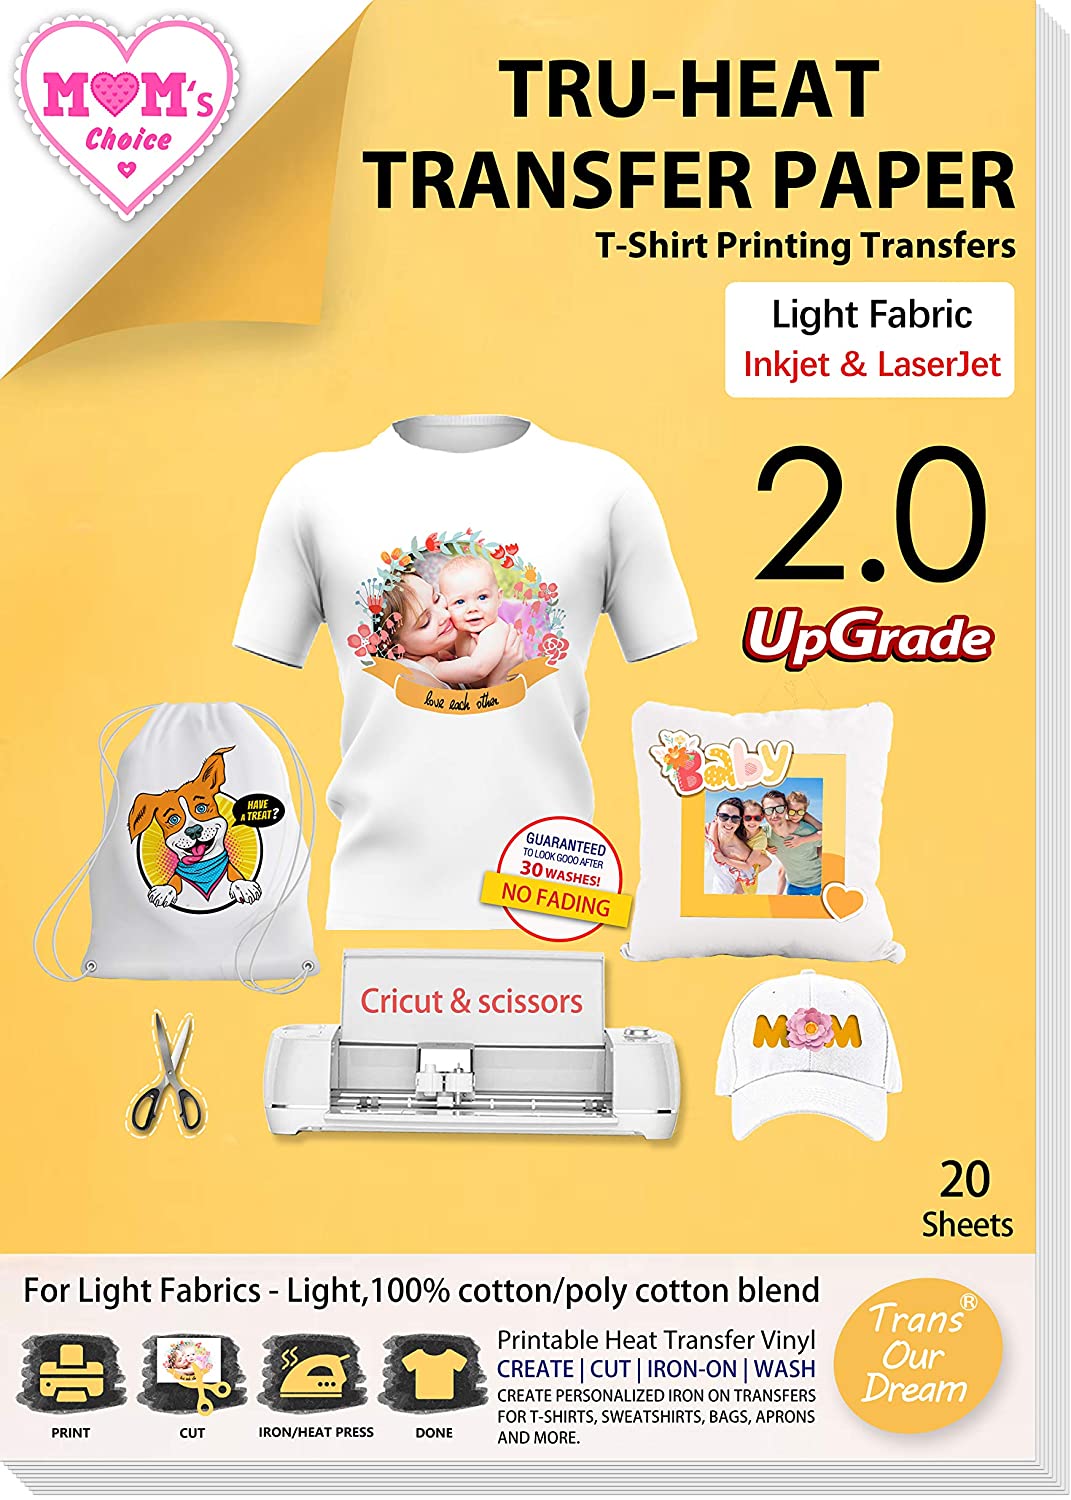 Iron on Heat Transfer Paper for Dark Fabric 8.5x11 inch Printable T Shirt Transfer Paper Compatible with Inkjet Printer 10 Sheets